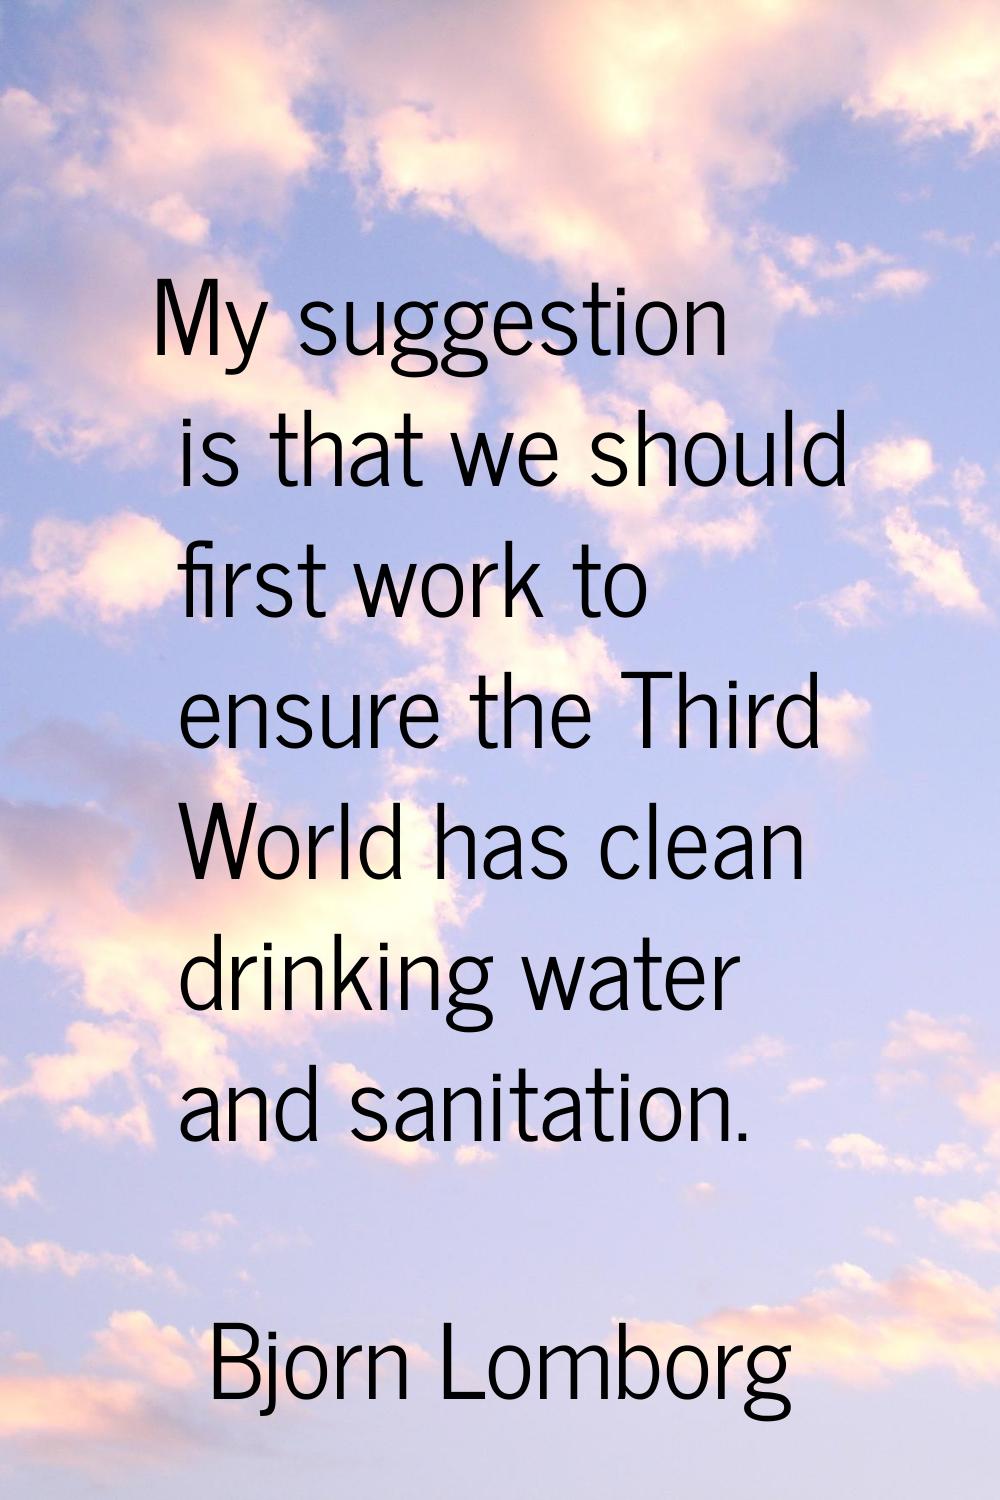 My suggestion is that we should first work to ensure the Third World has clean drinking water and s